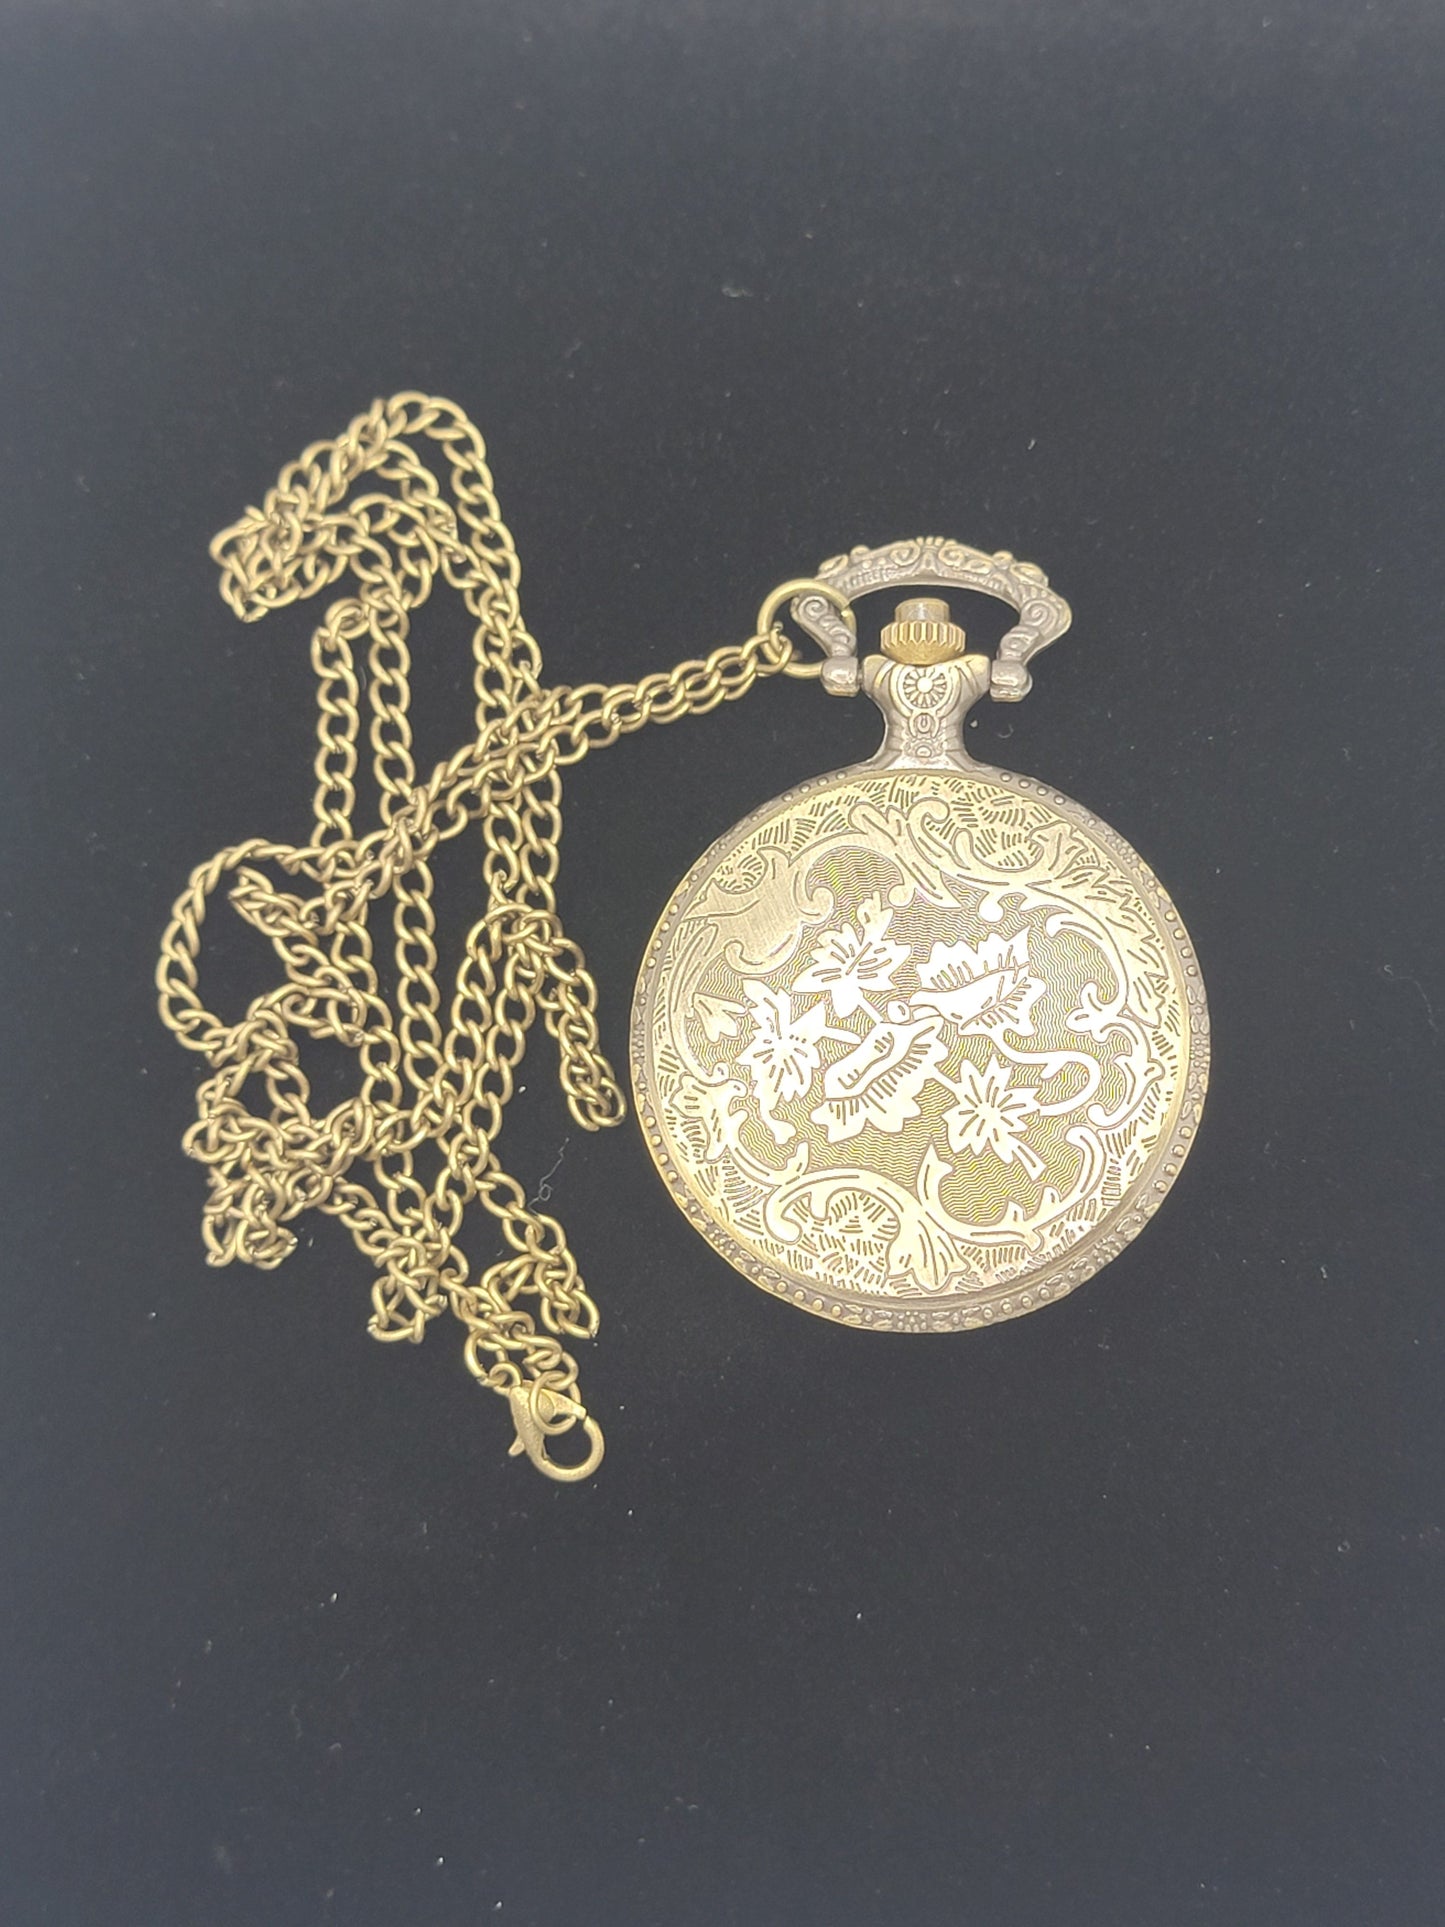 Bronze Fire Fighter Pocket Watch with Decorative Gift Box